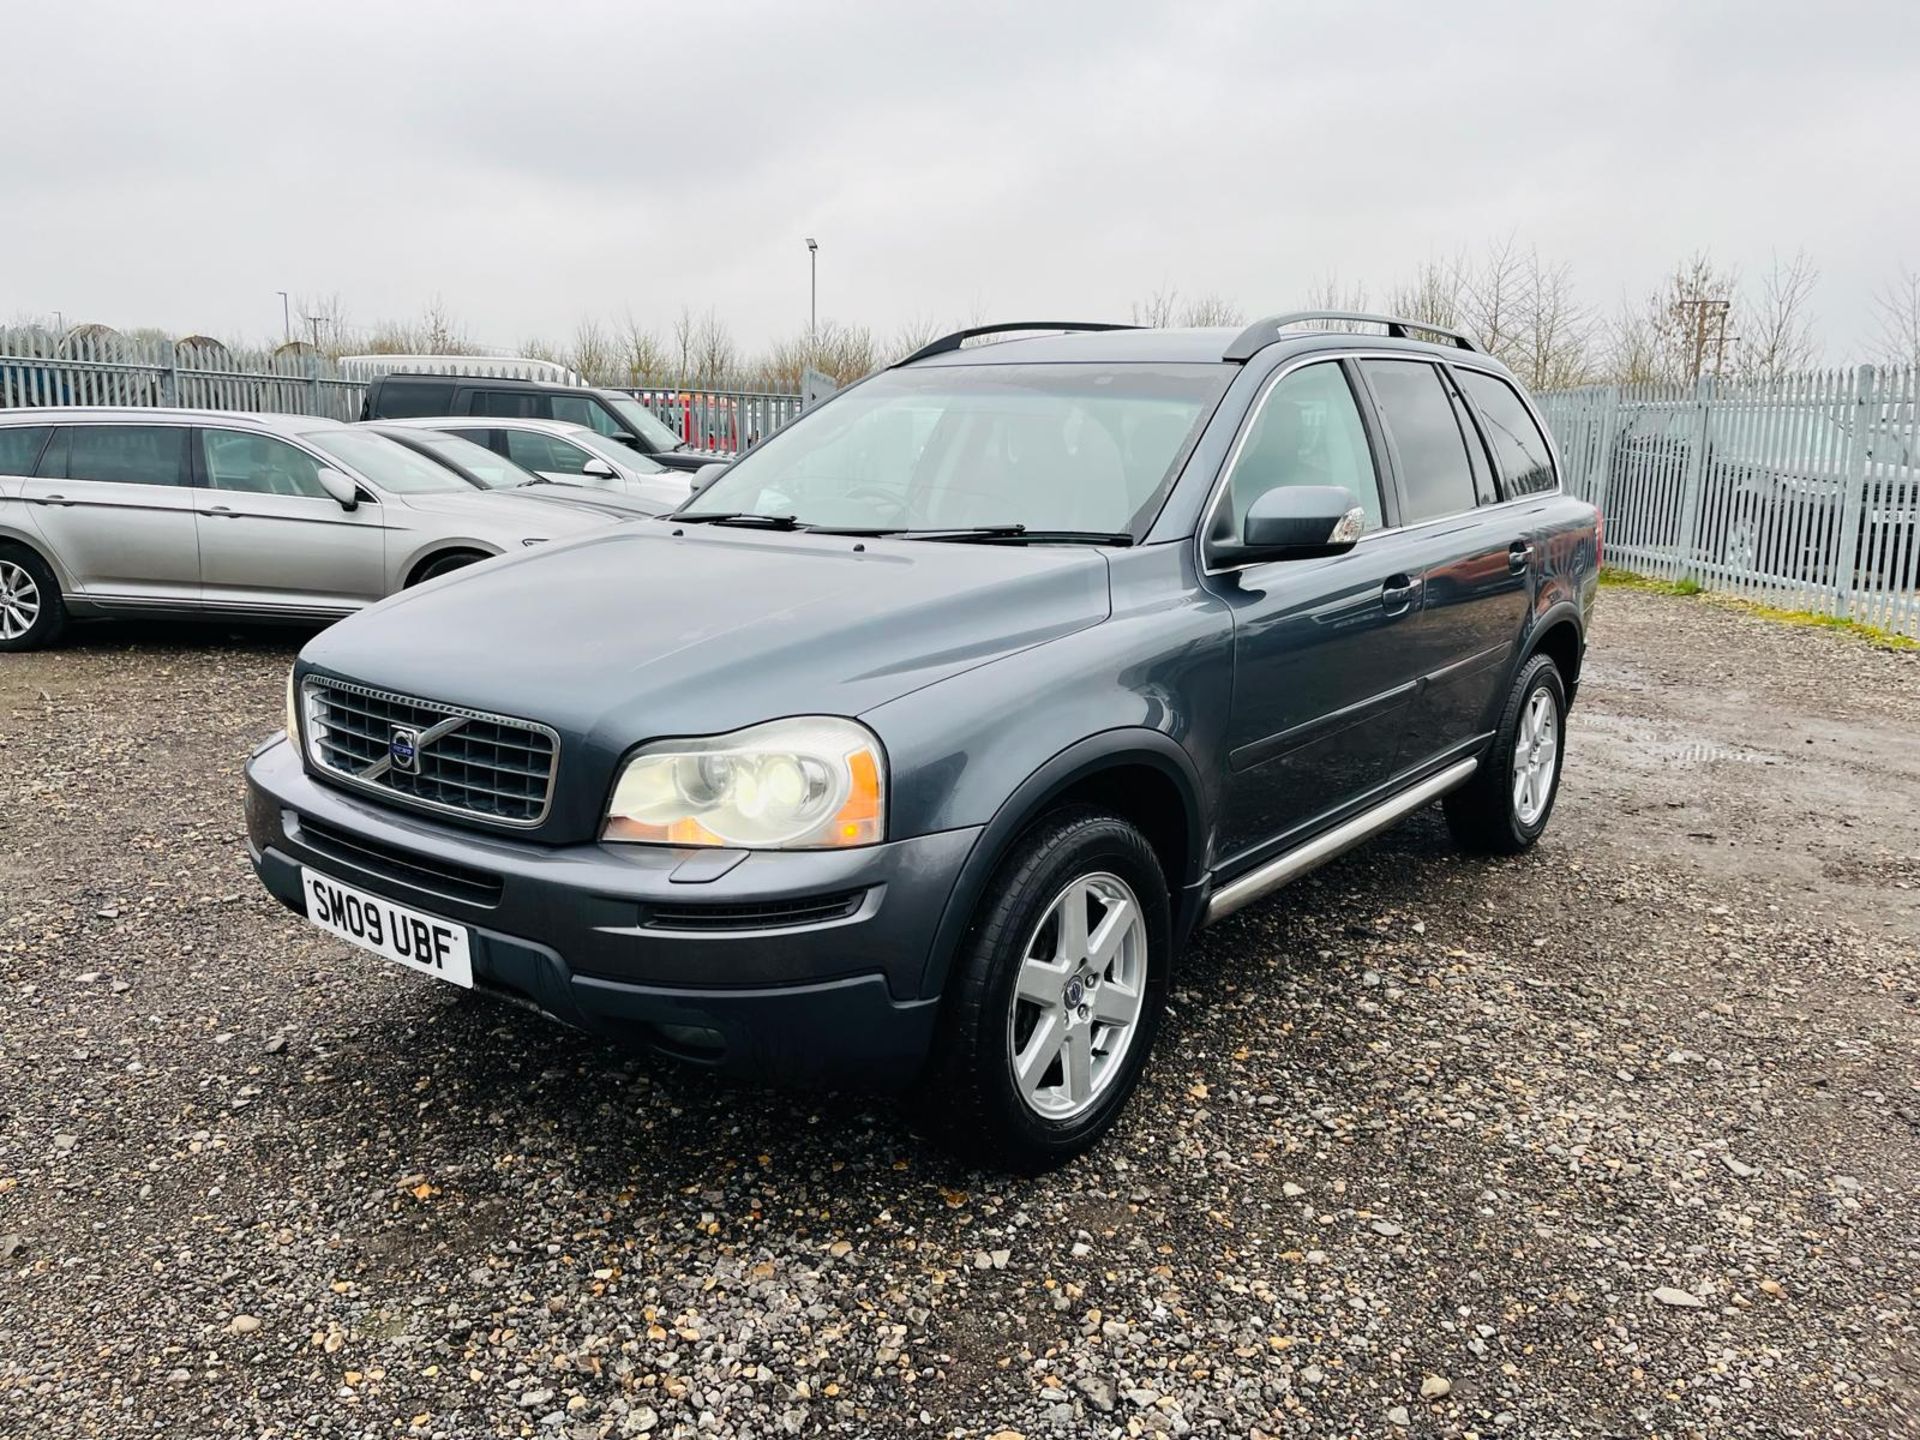 ** ON SALE ** Volvo Xc90 Active Automatic D5 185 Geartronic -Air Conditioning-Bluetooth Handsfree - Image 3 of 36